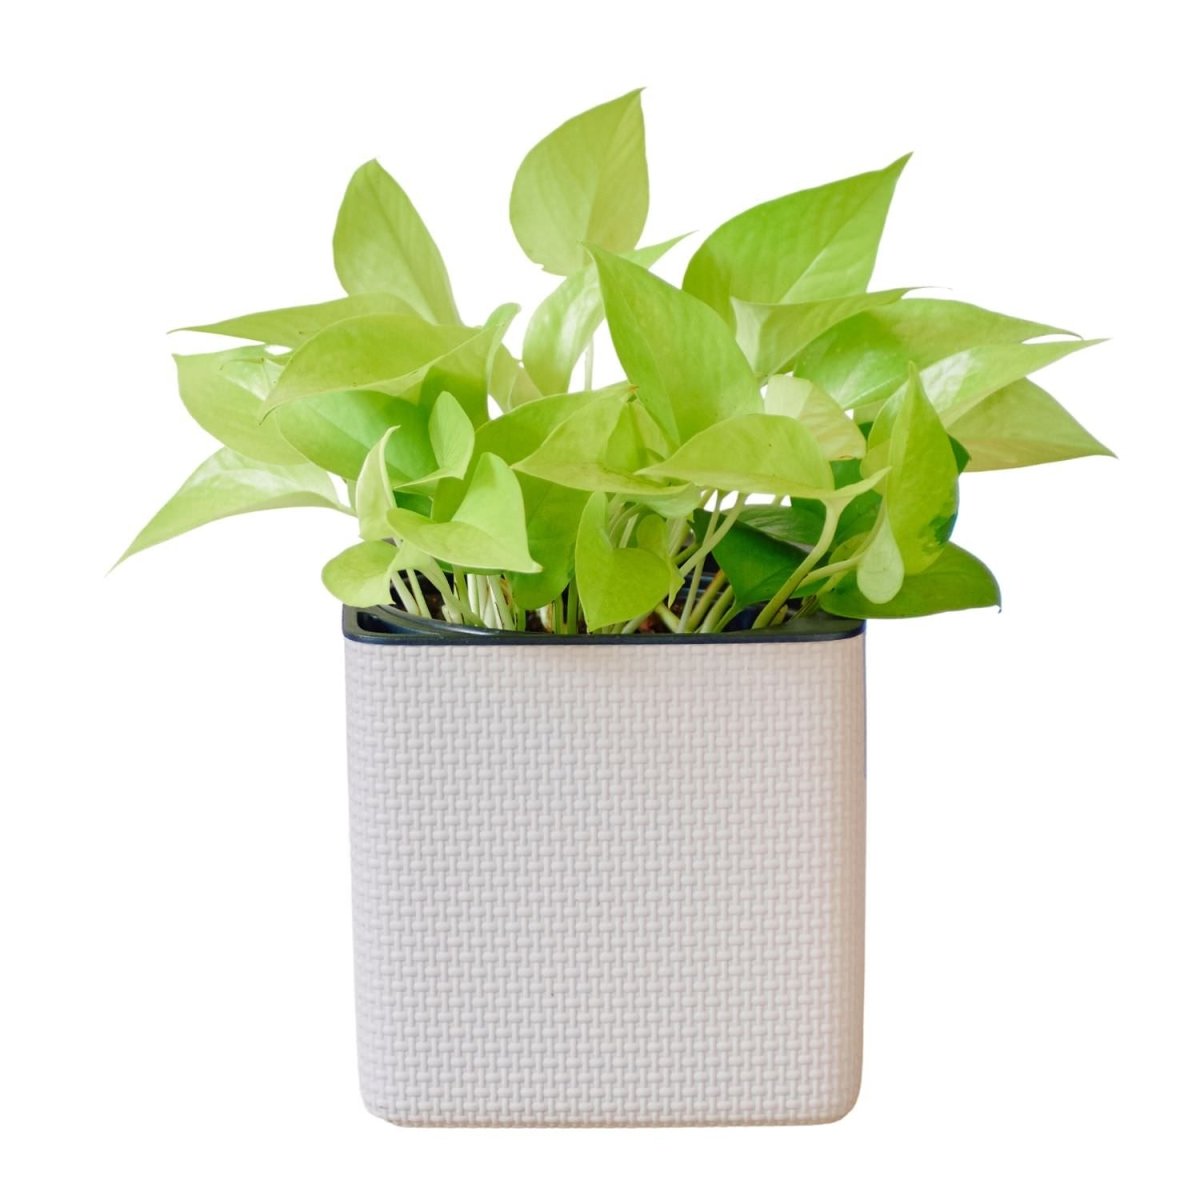 Pothos Neon Placed In Lechuza Cube 16 Planter - Sand Brown - My City Plants